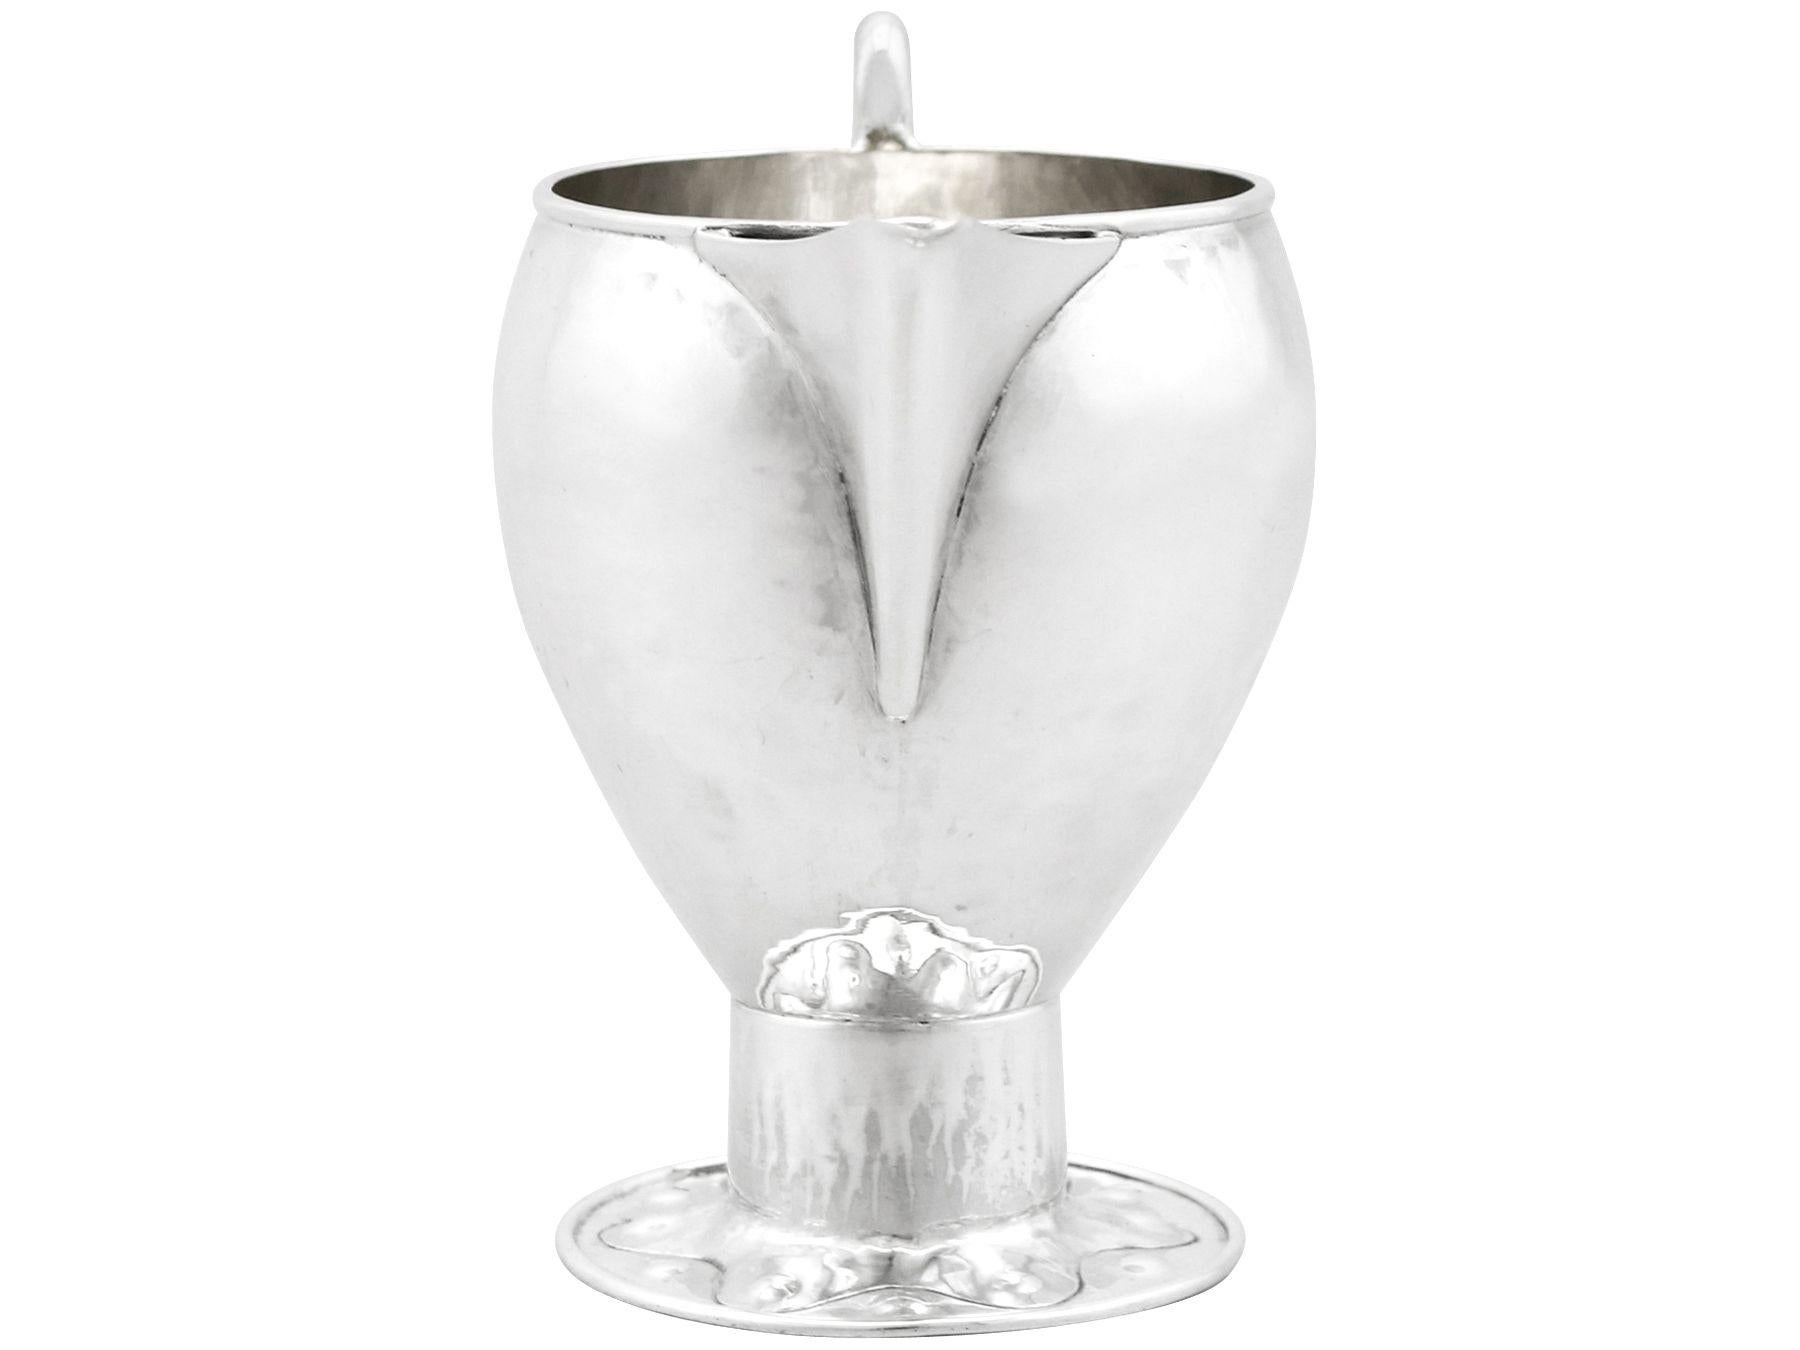 A fine and impressive antique George V English sterling silver cream jug made by A E Jones in the Arts & Crafts style; an addition to our range of collectable silverware

This fine antique sterling silver cream jug has a circular rounded